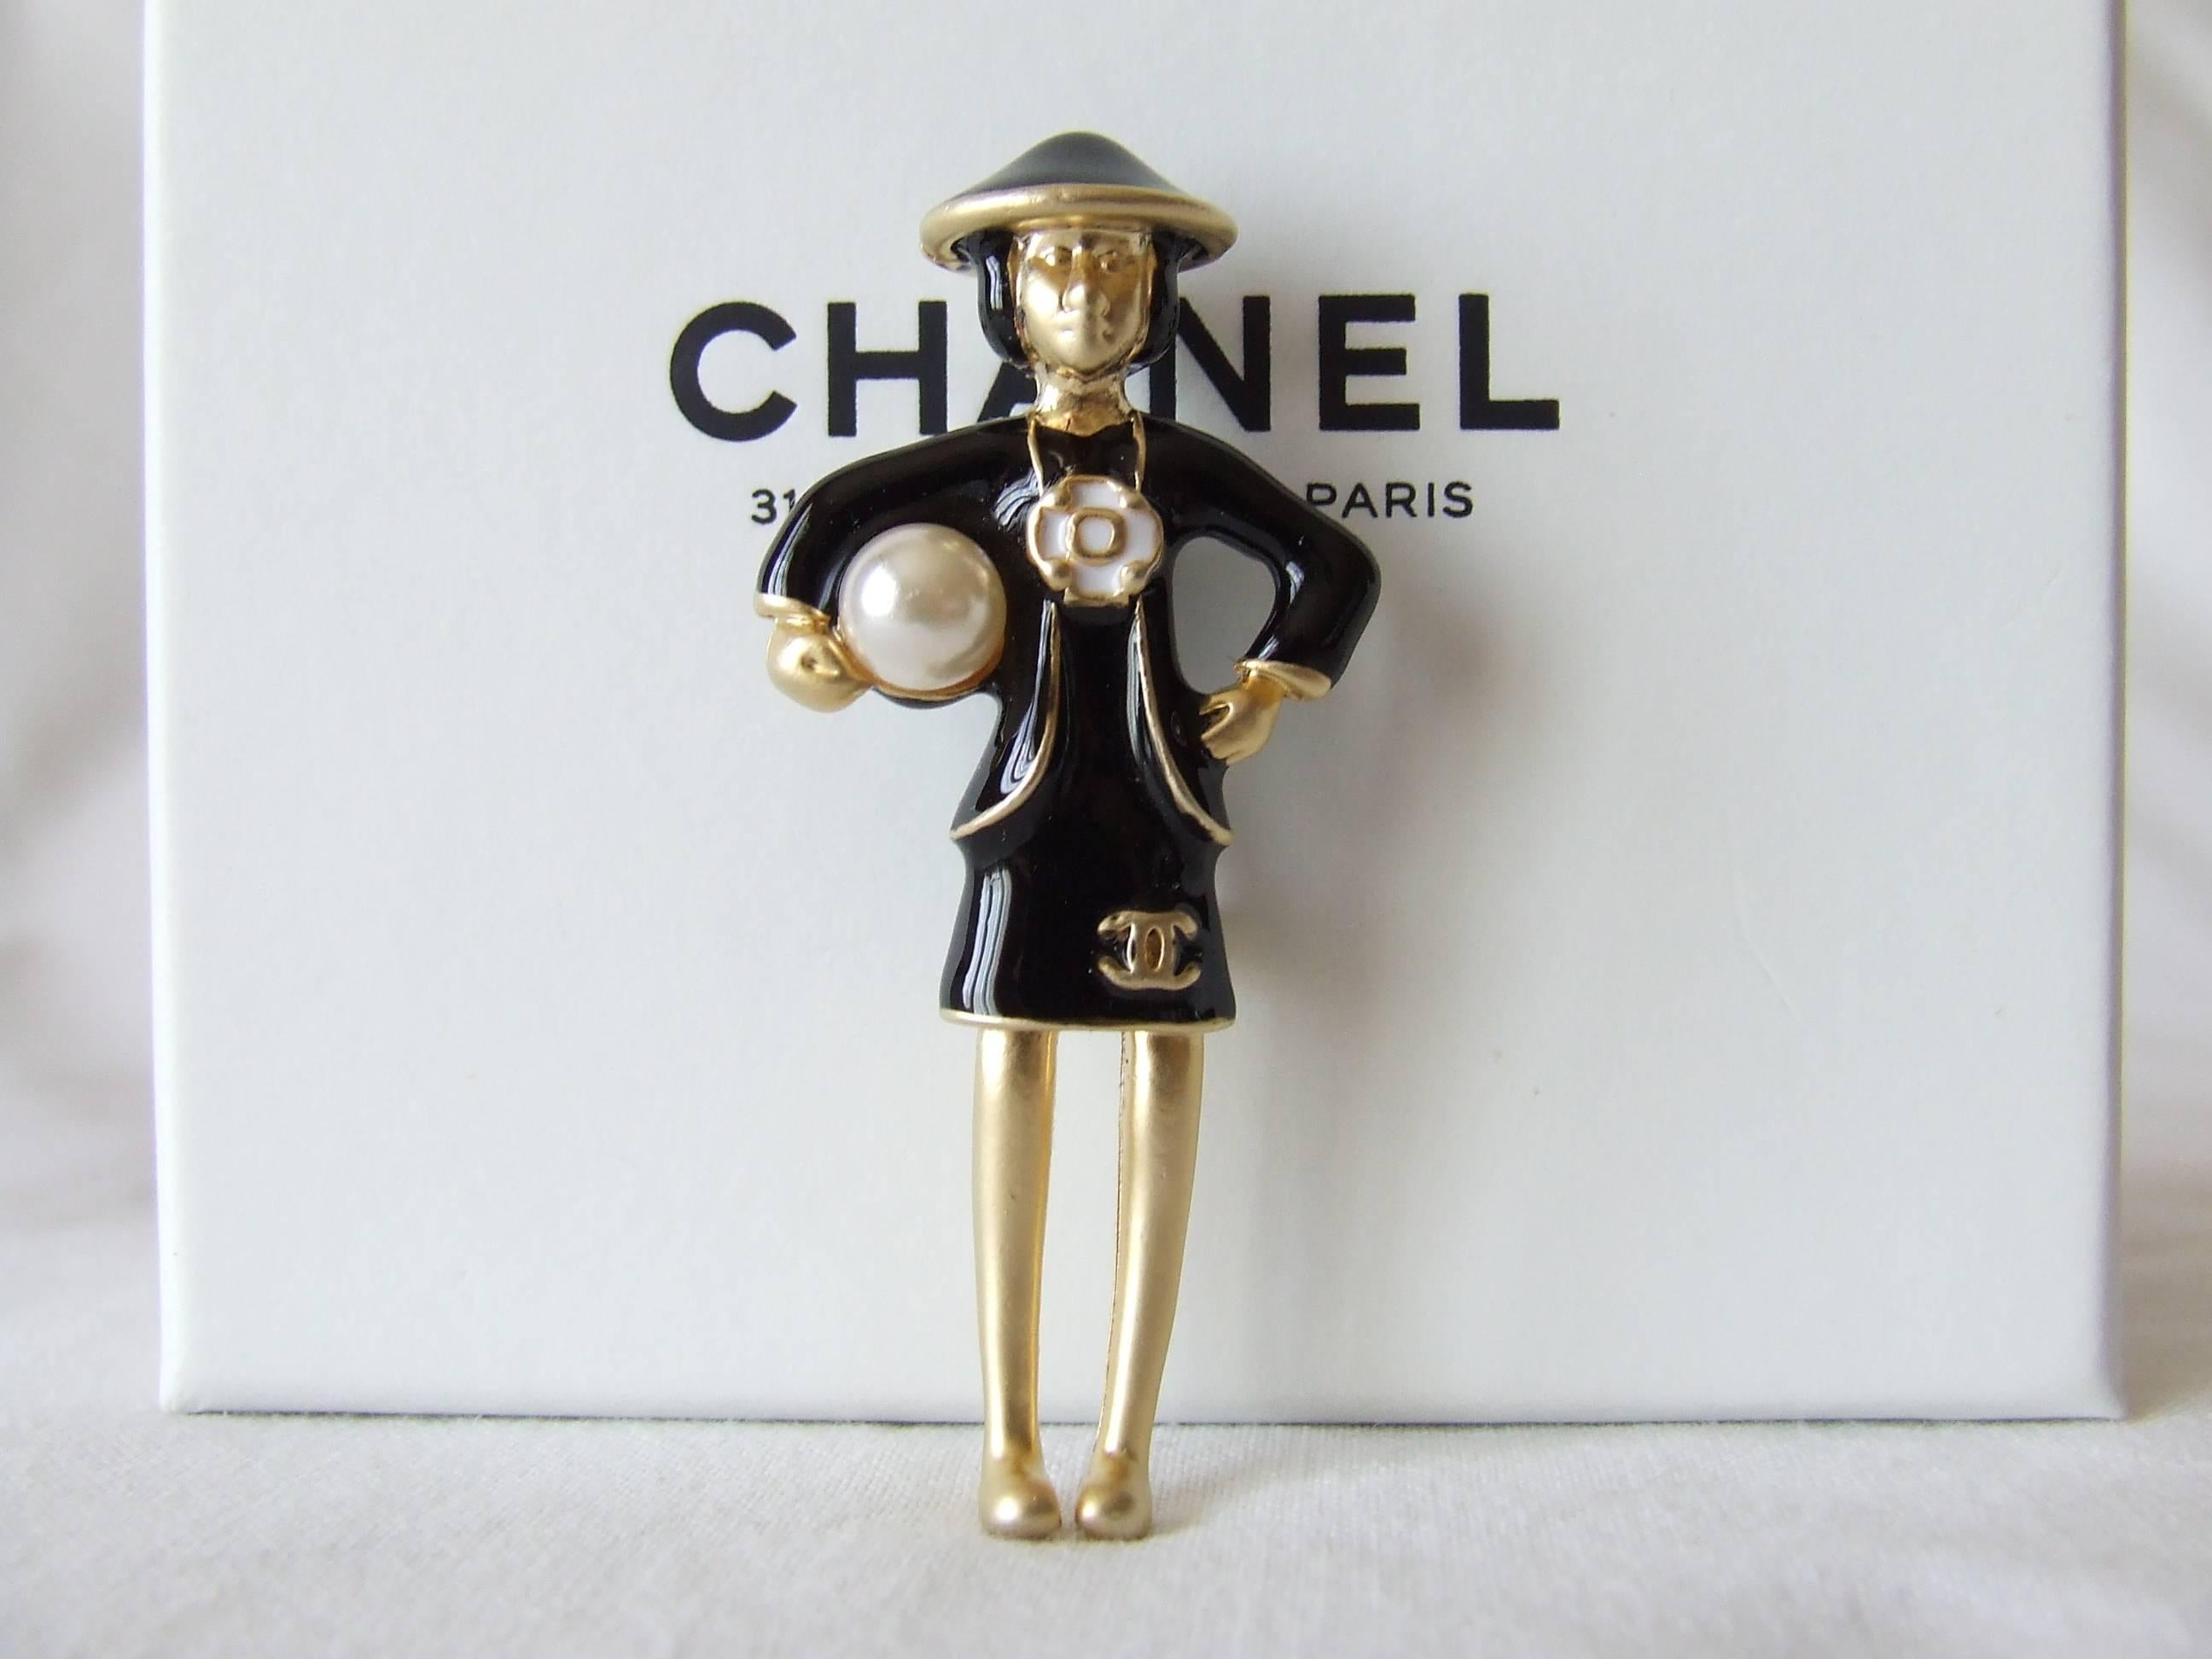 Beautiful and Rare authentic CHANEL Brooch

Made of golden Metal, dress and hat in black Enamel

Represents Coco Chanel in her black dress, holding a pearl under her right arm

Camelia in the middle, and cc logo at the bottom of the